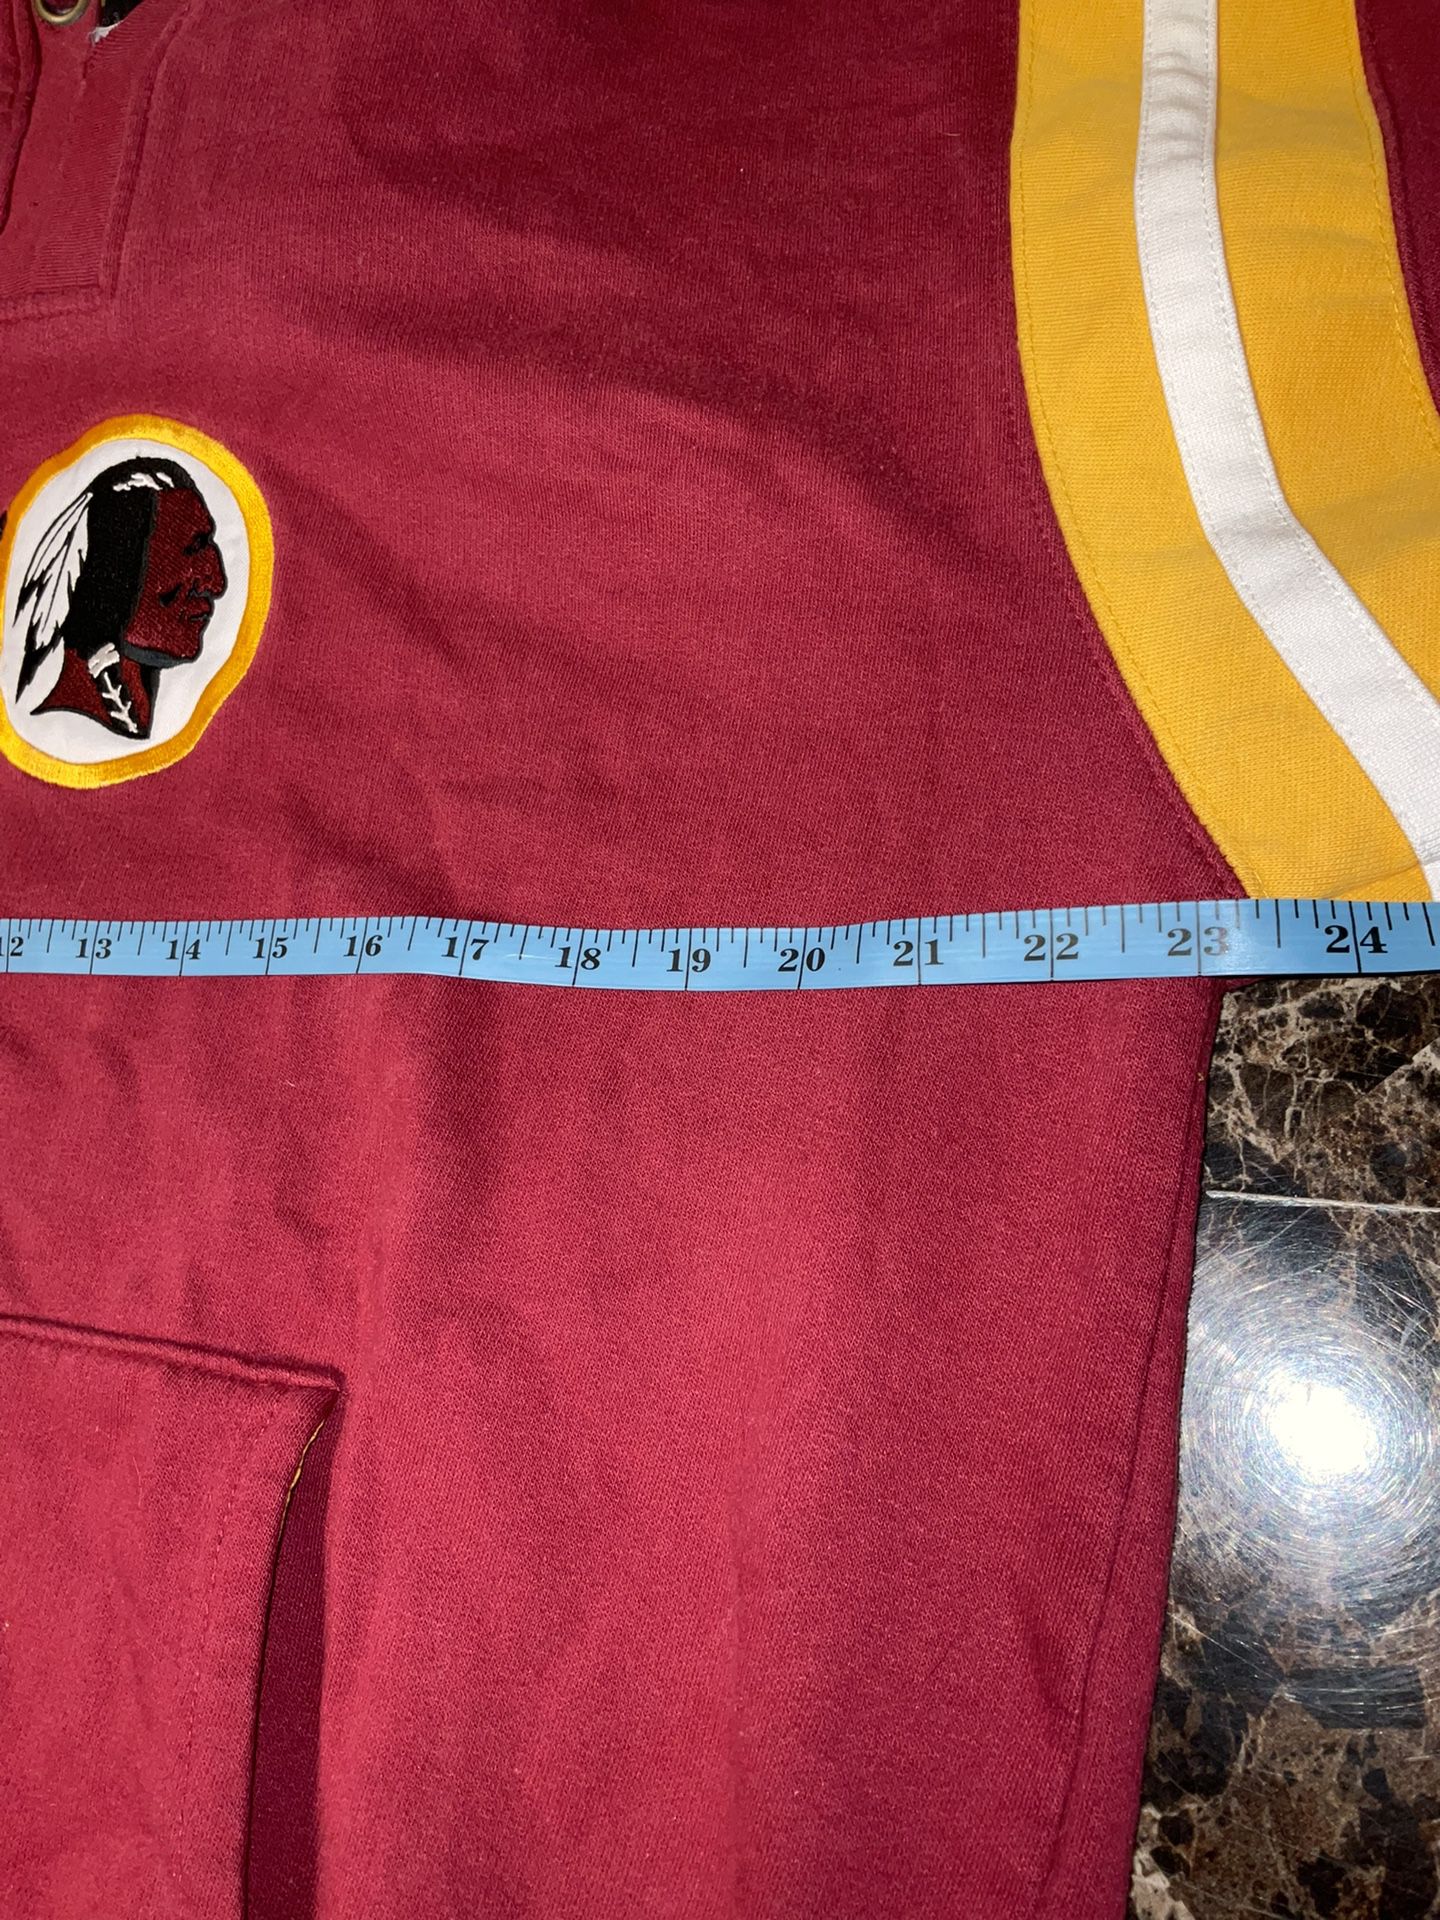 Washington Redskins Pullover Hooded Sweatshirt Hoodie NFL Embroidered XL  No rips, tears or stains (I have 20+ Redskins, WFT items listed - I will com